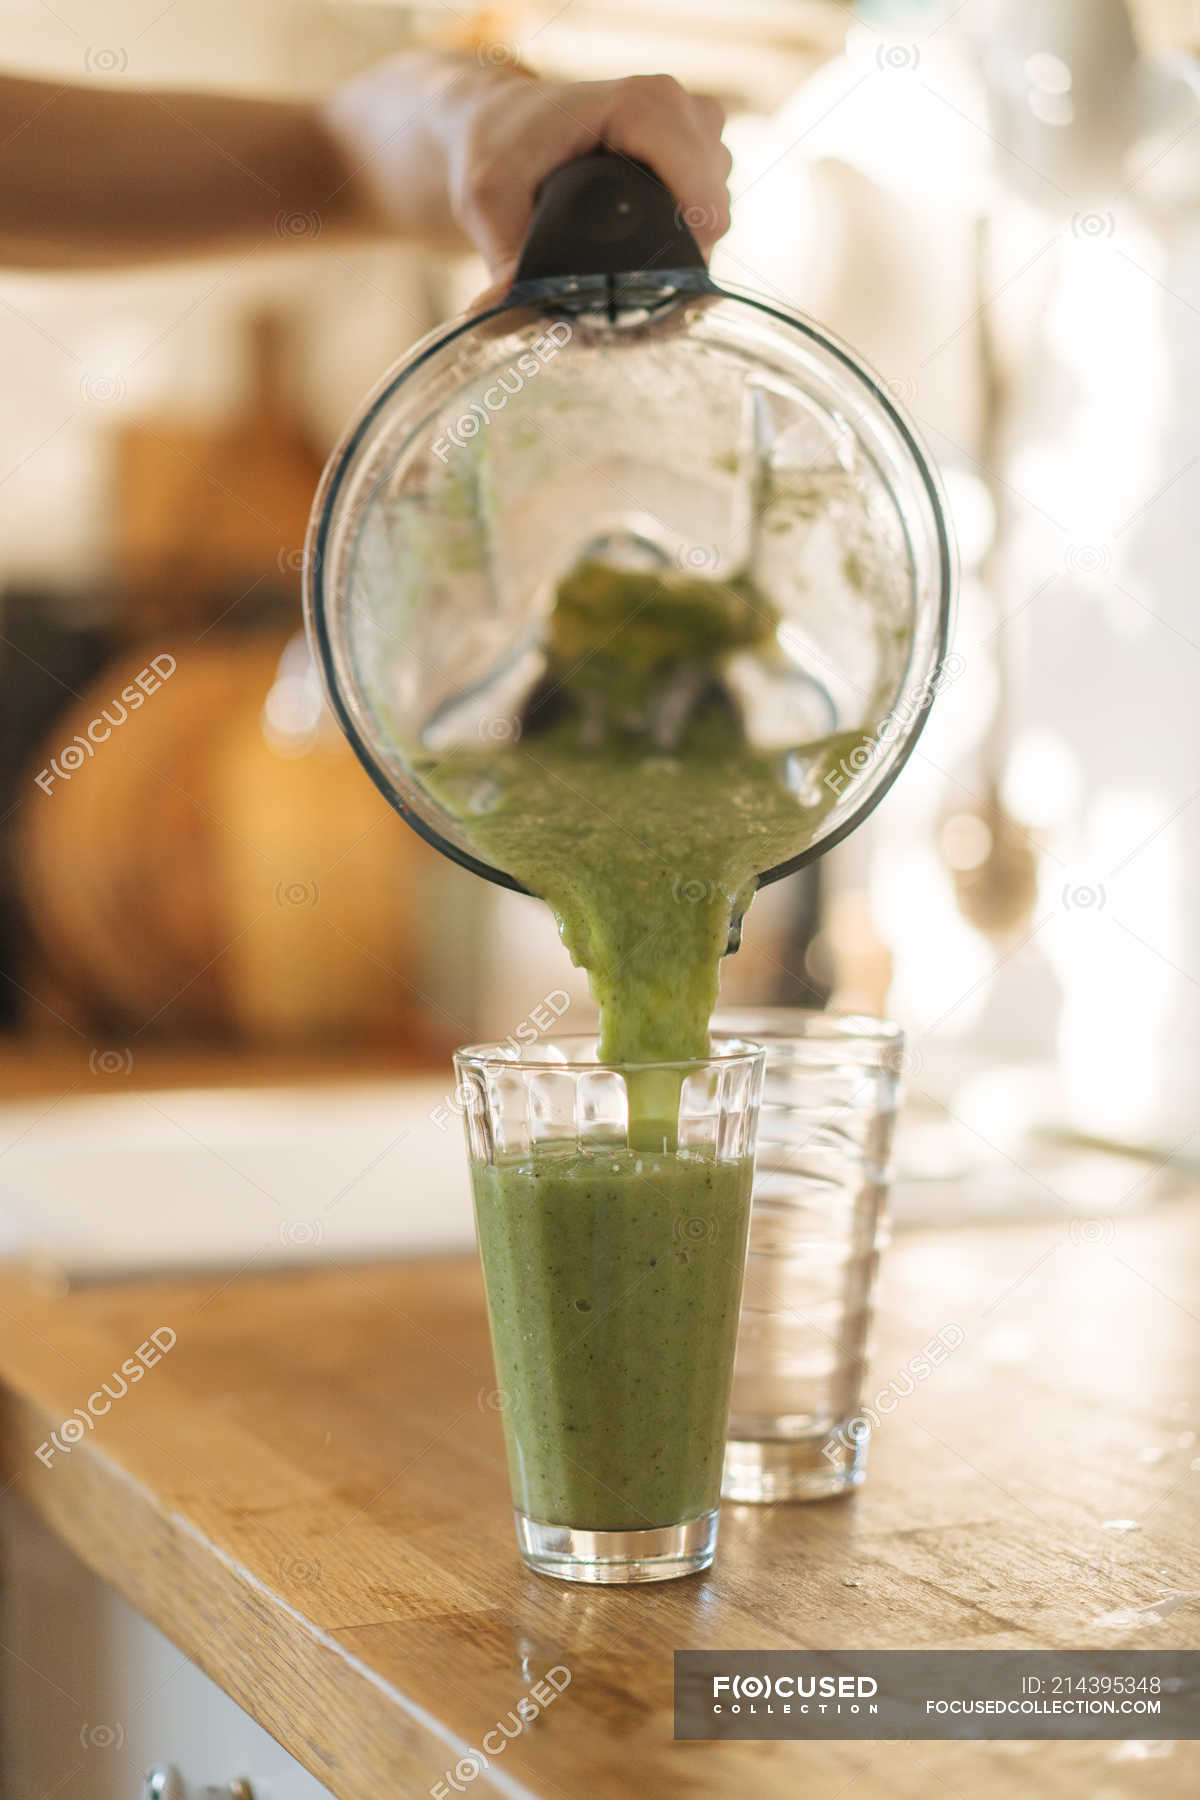 Human hand pouring smoothie in glass — products, fresh - Stock Photo |  #214395348